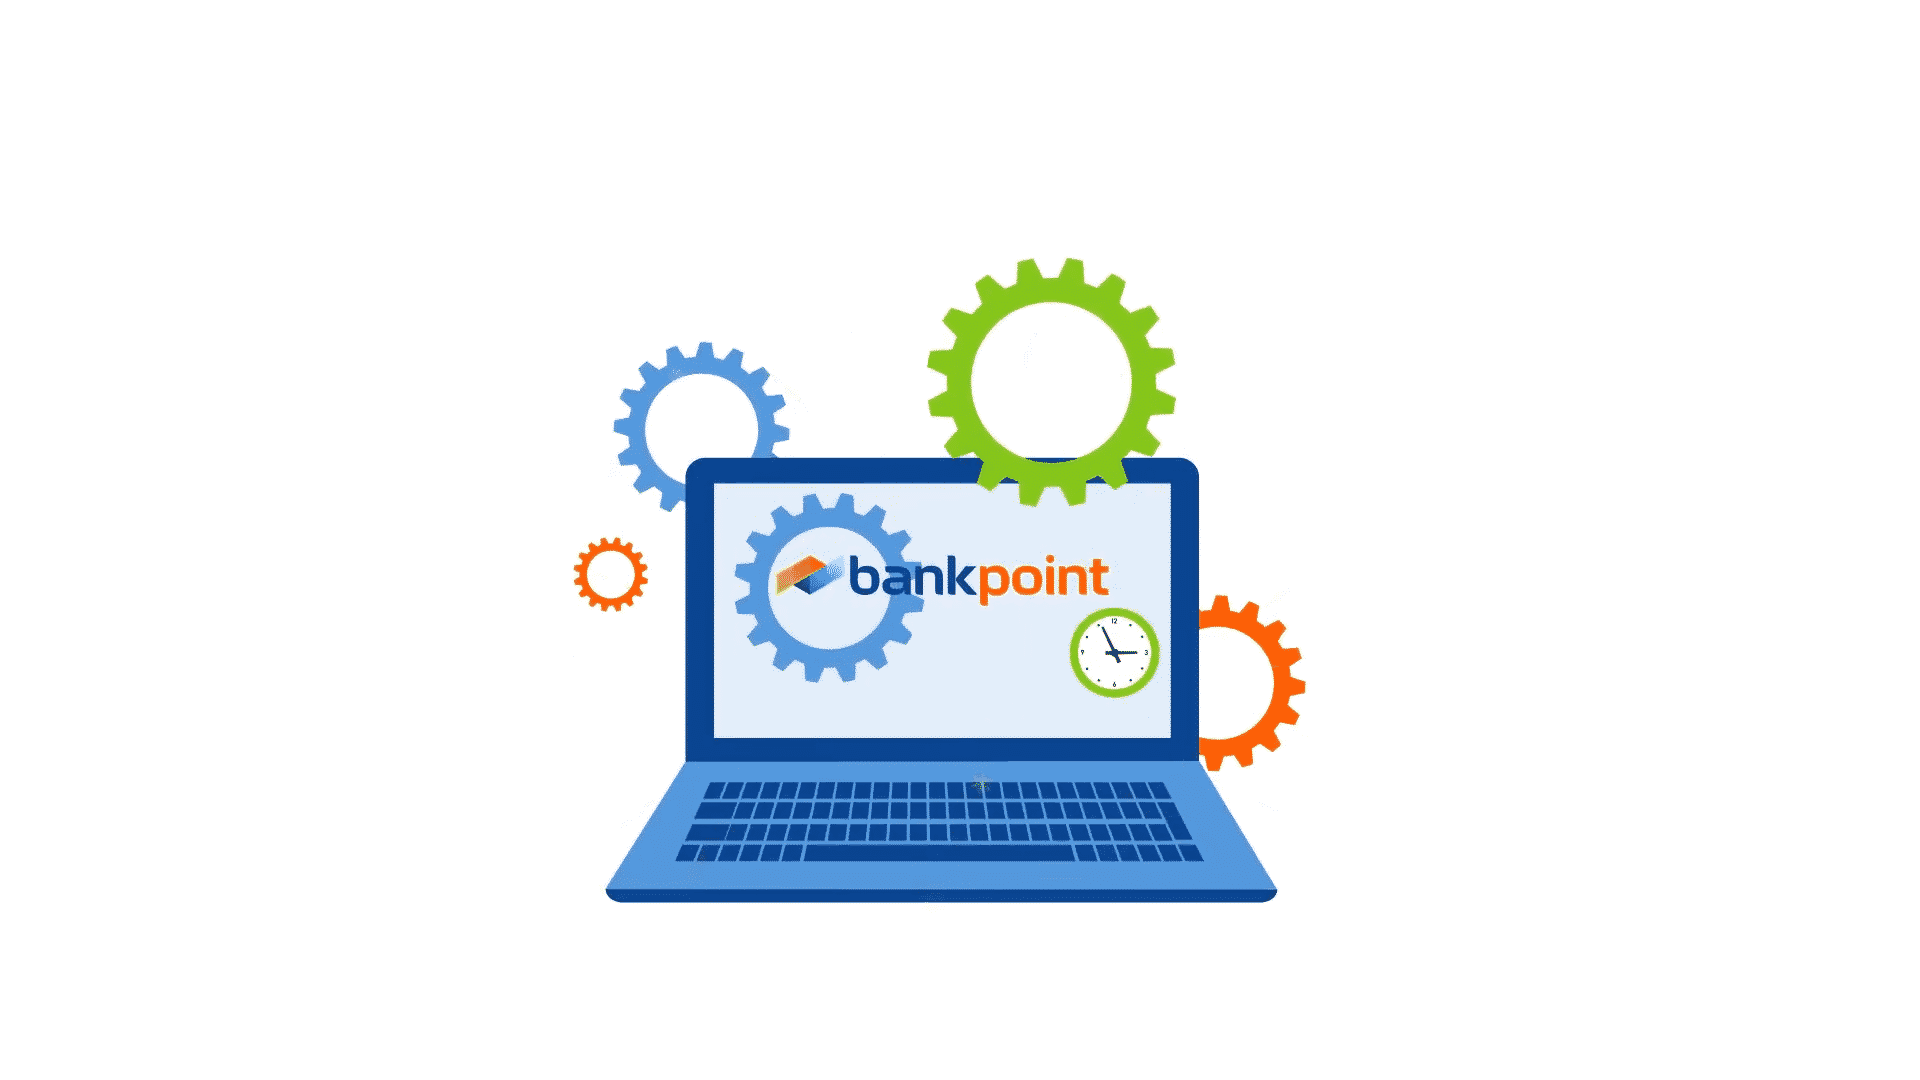 VSI Solutions, Inc. rebrands and will now operate under the name BankPoint